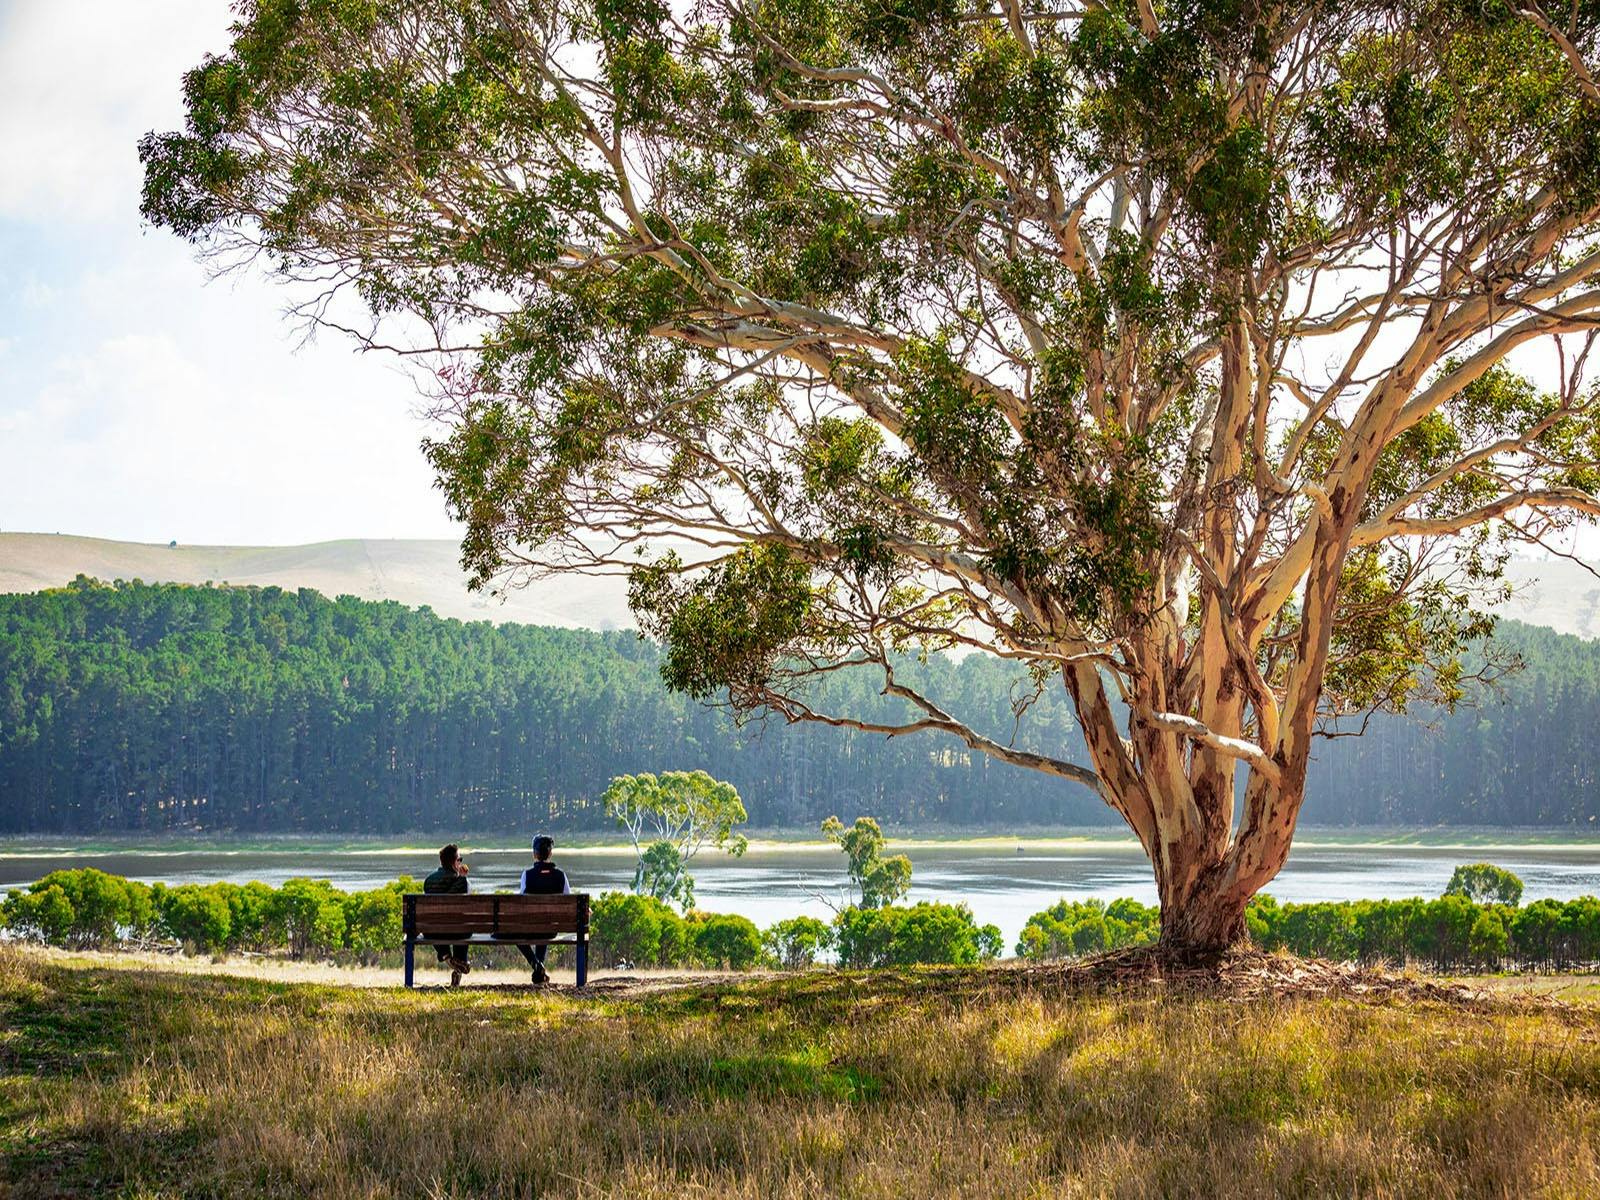 Scenic lookouts and places to relax available at Myponga Reservoir Reserve